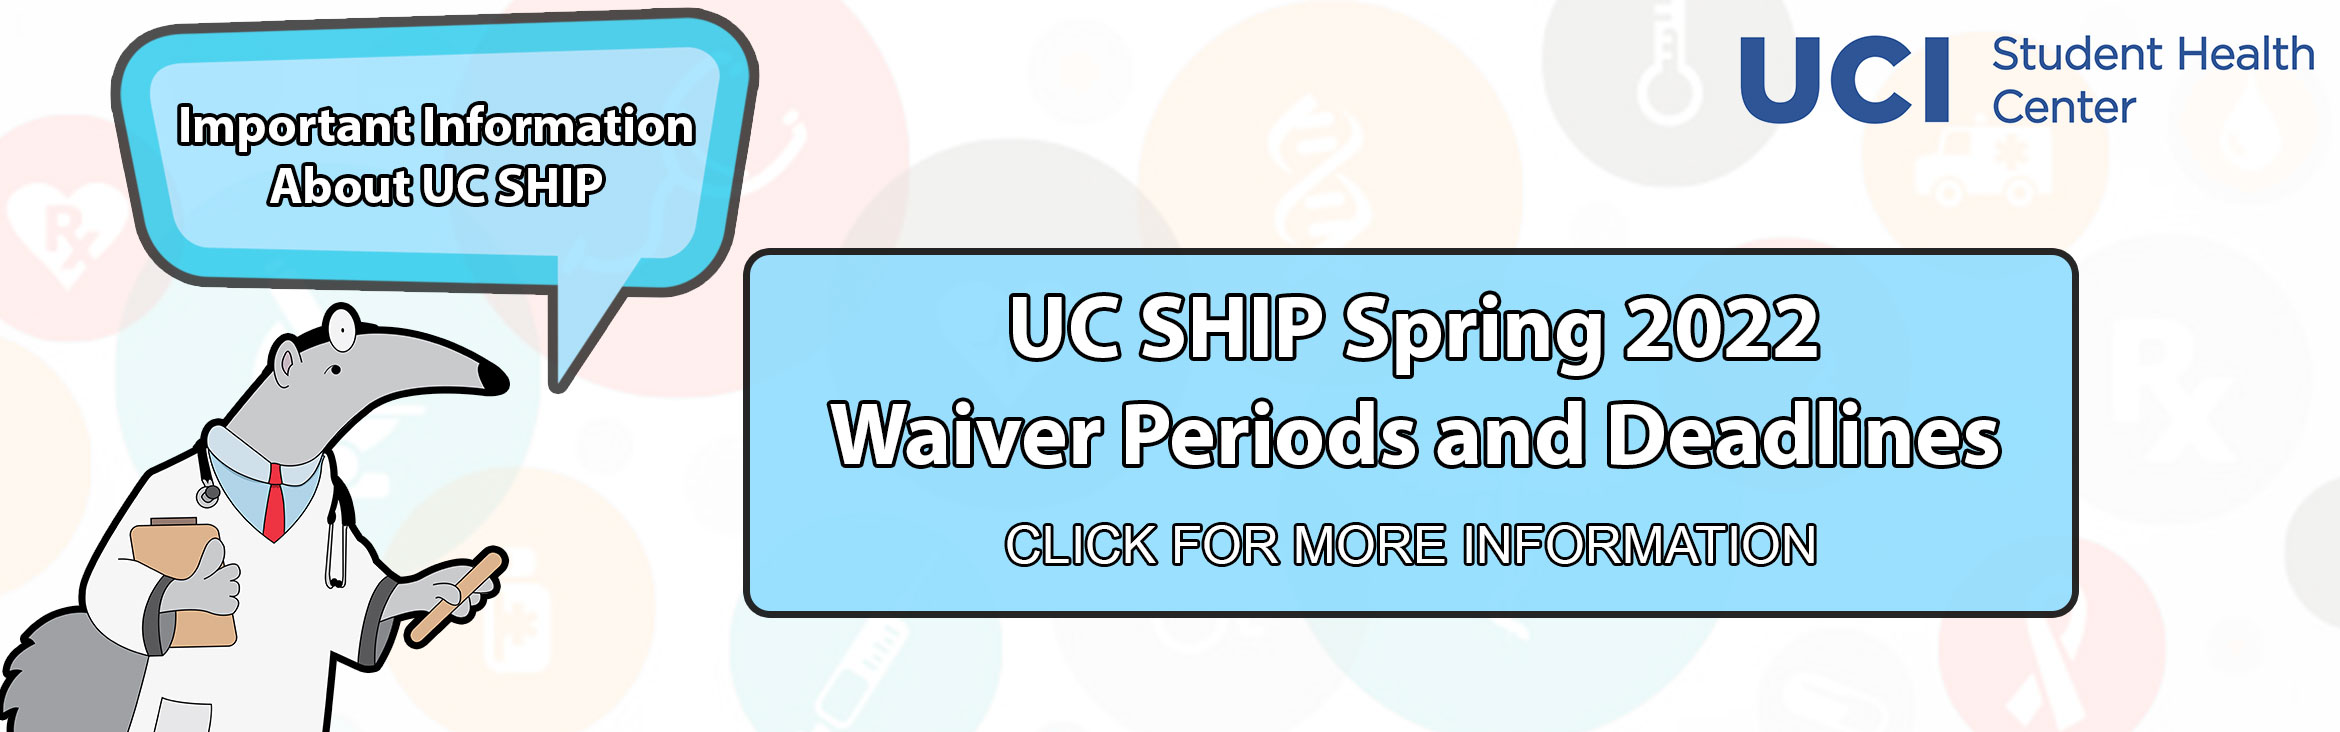 Important Information About UC SHIP. 